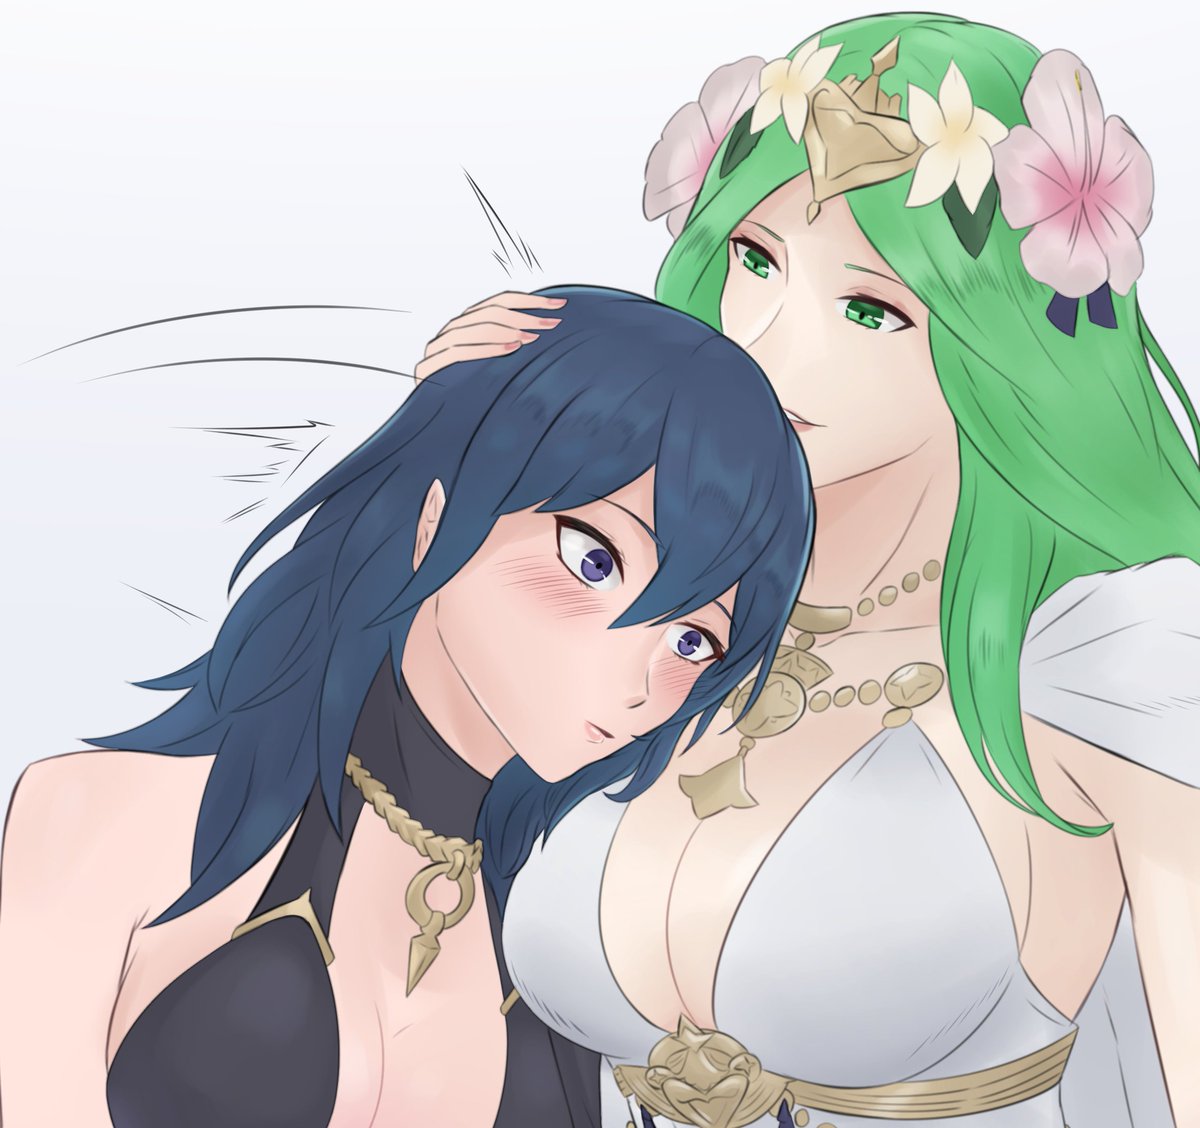 It's time for Summer #Byleth and #Rhea Variants on Patreon #FireEmblem...